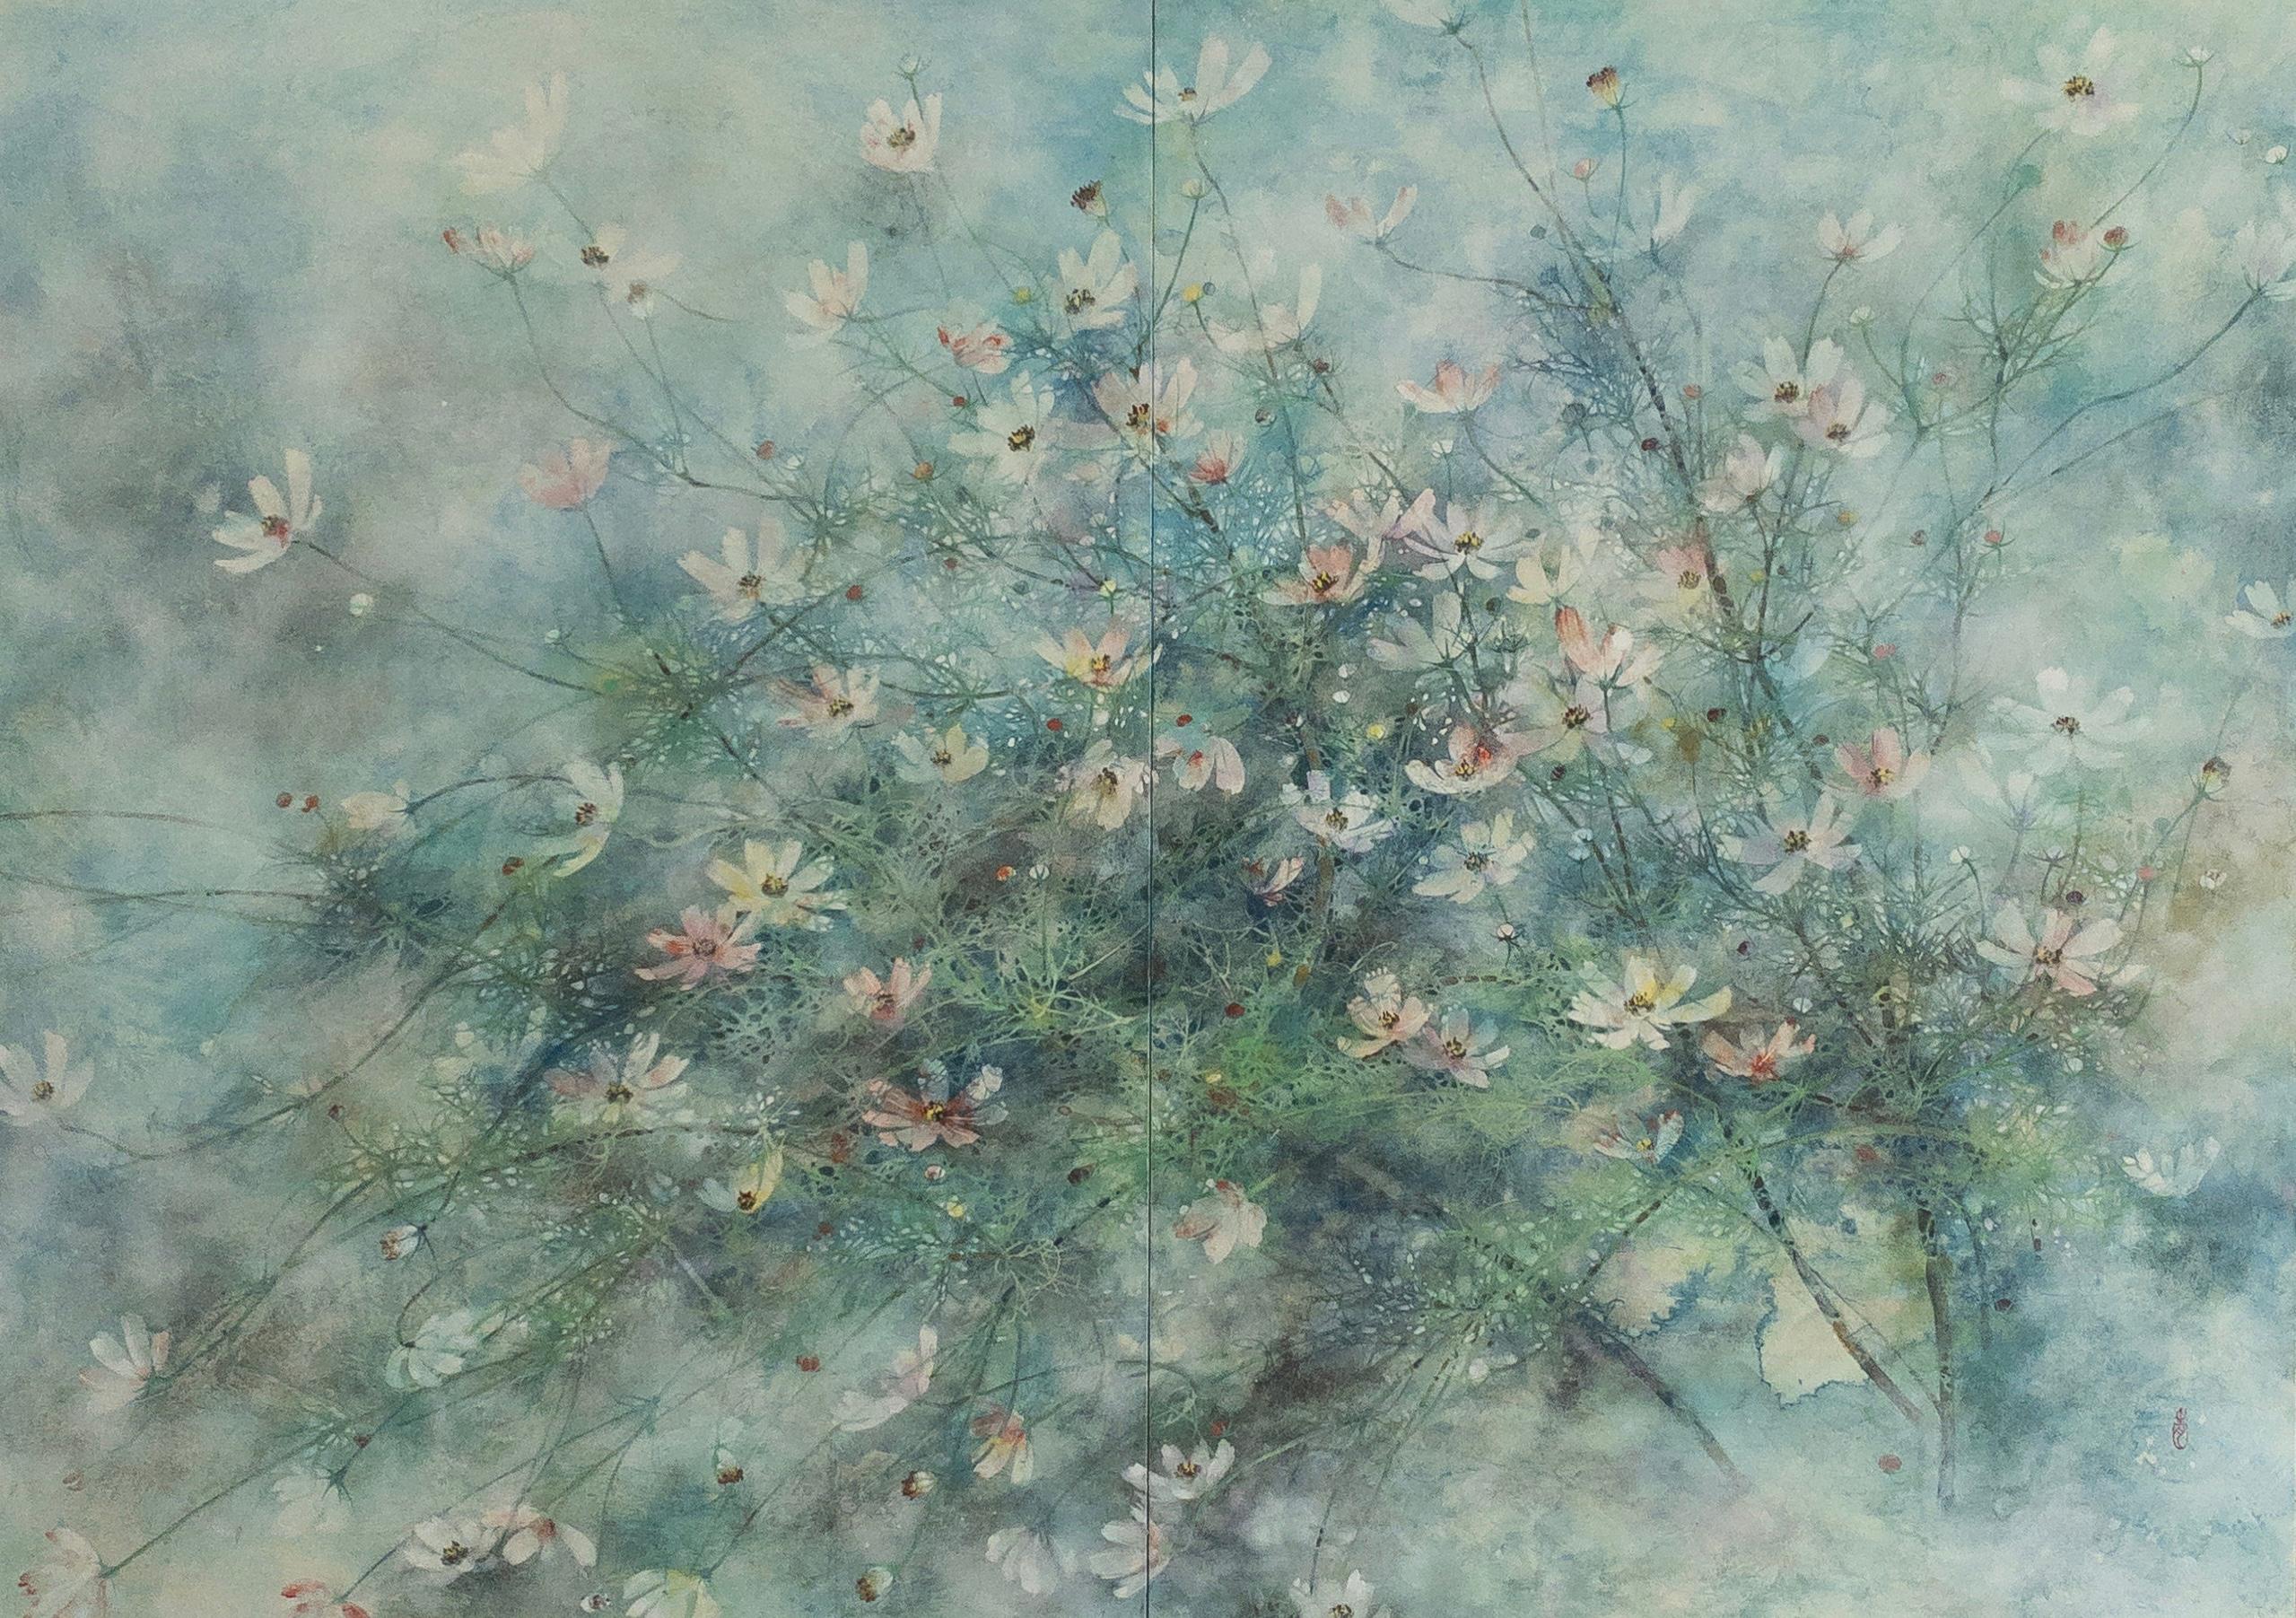 Yiching Chen Landscape Painting - Hope by CHEN Yiching - Contemporary Nihonga painting, cosmos flowers, blue